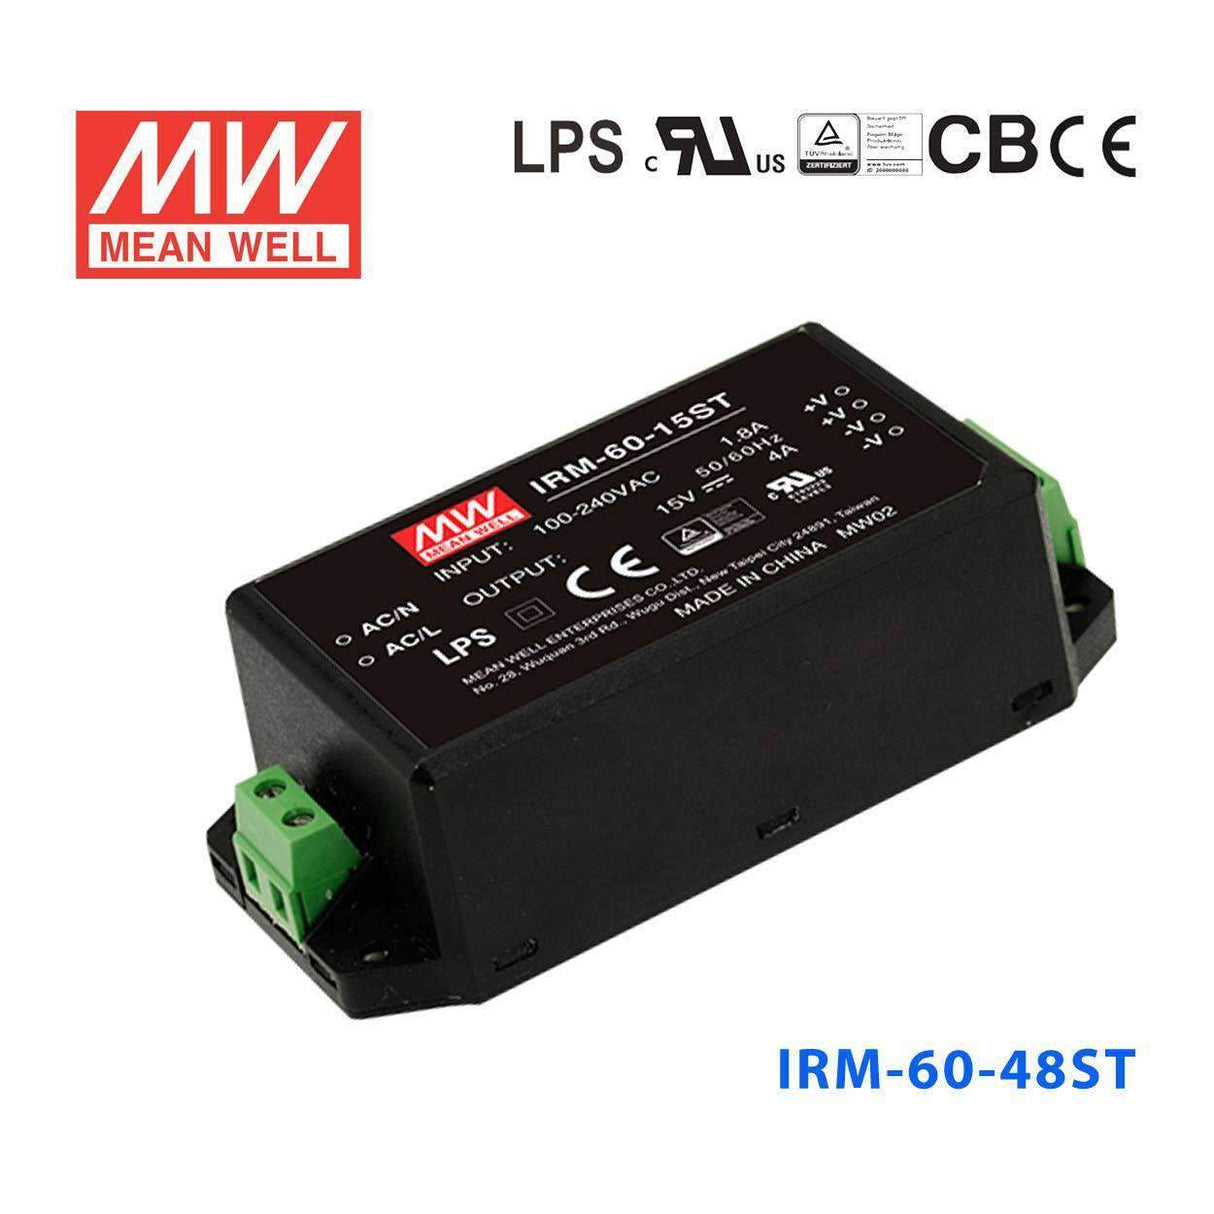 Mean Well IRM-60-48ST Switching Power Supply 60W 48V 1.25A - Encapsulated